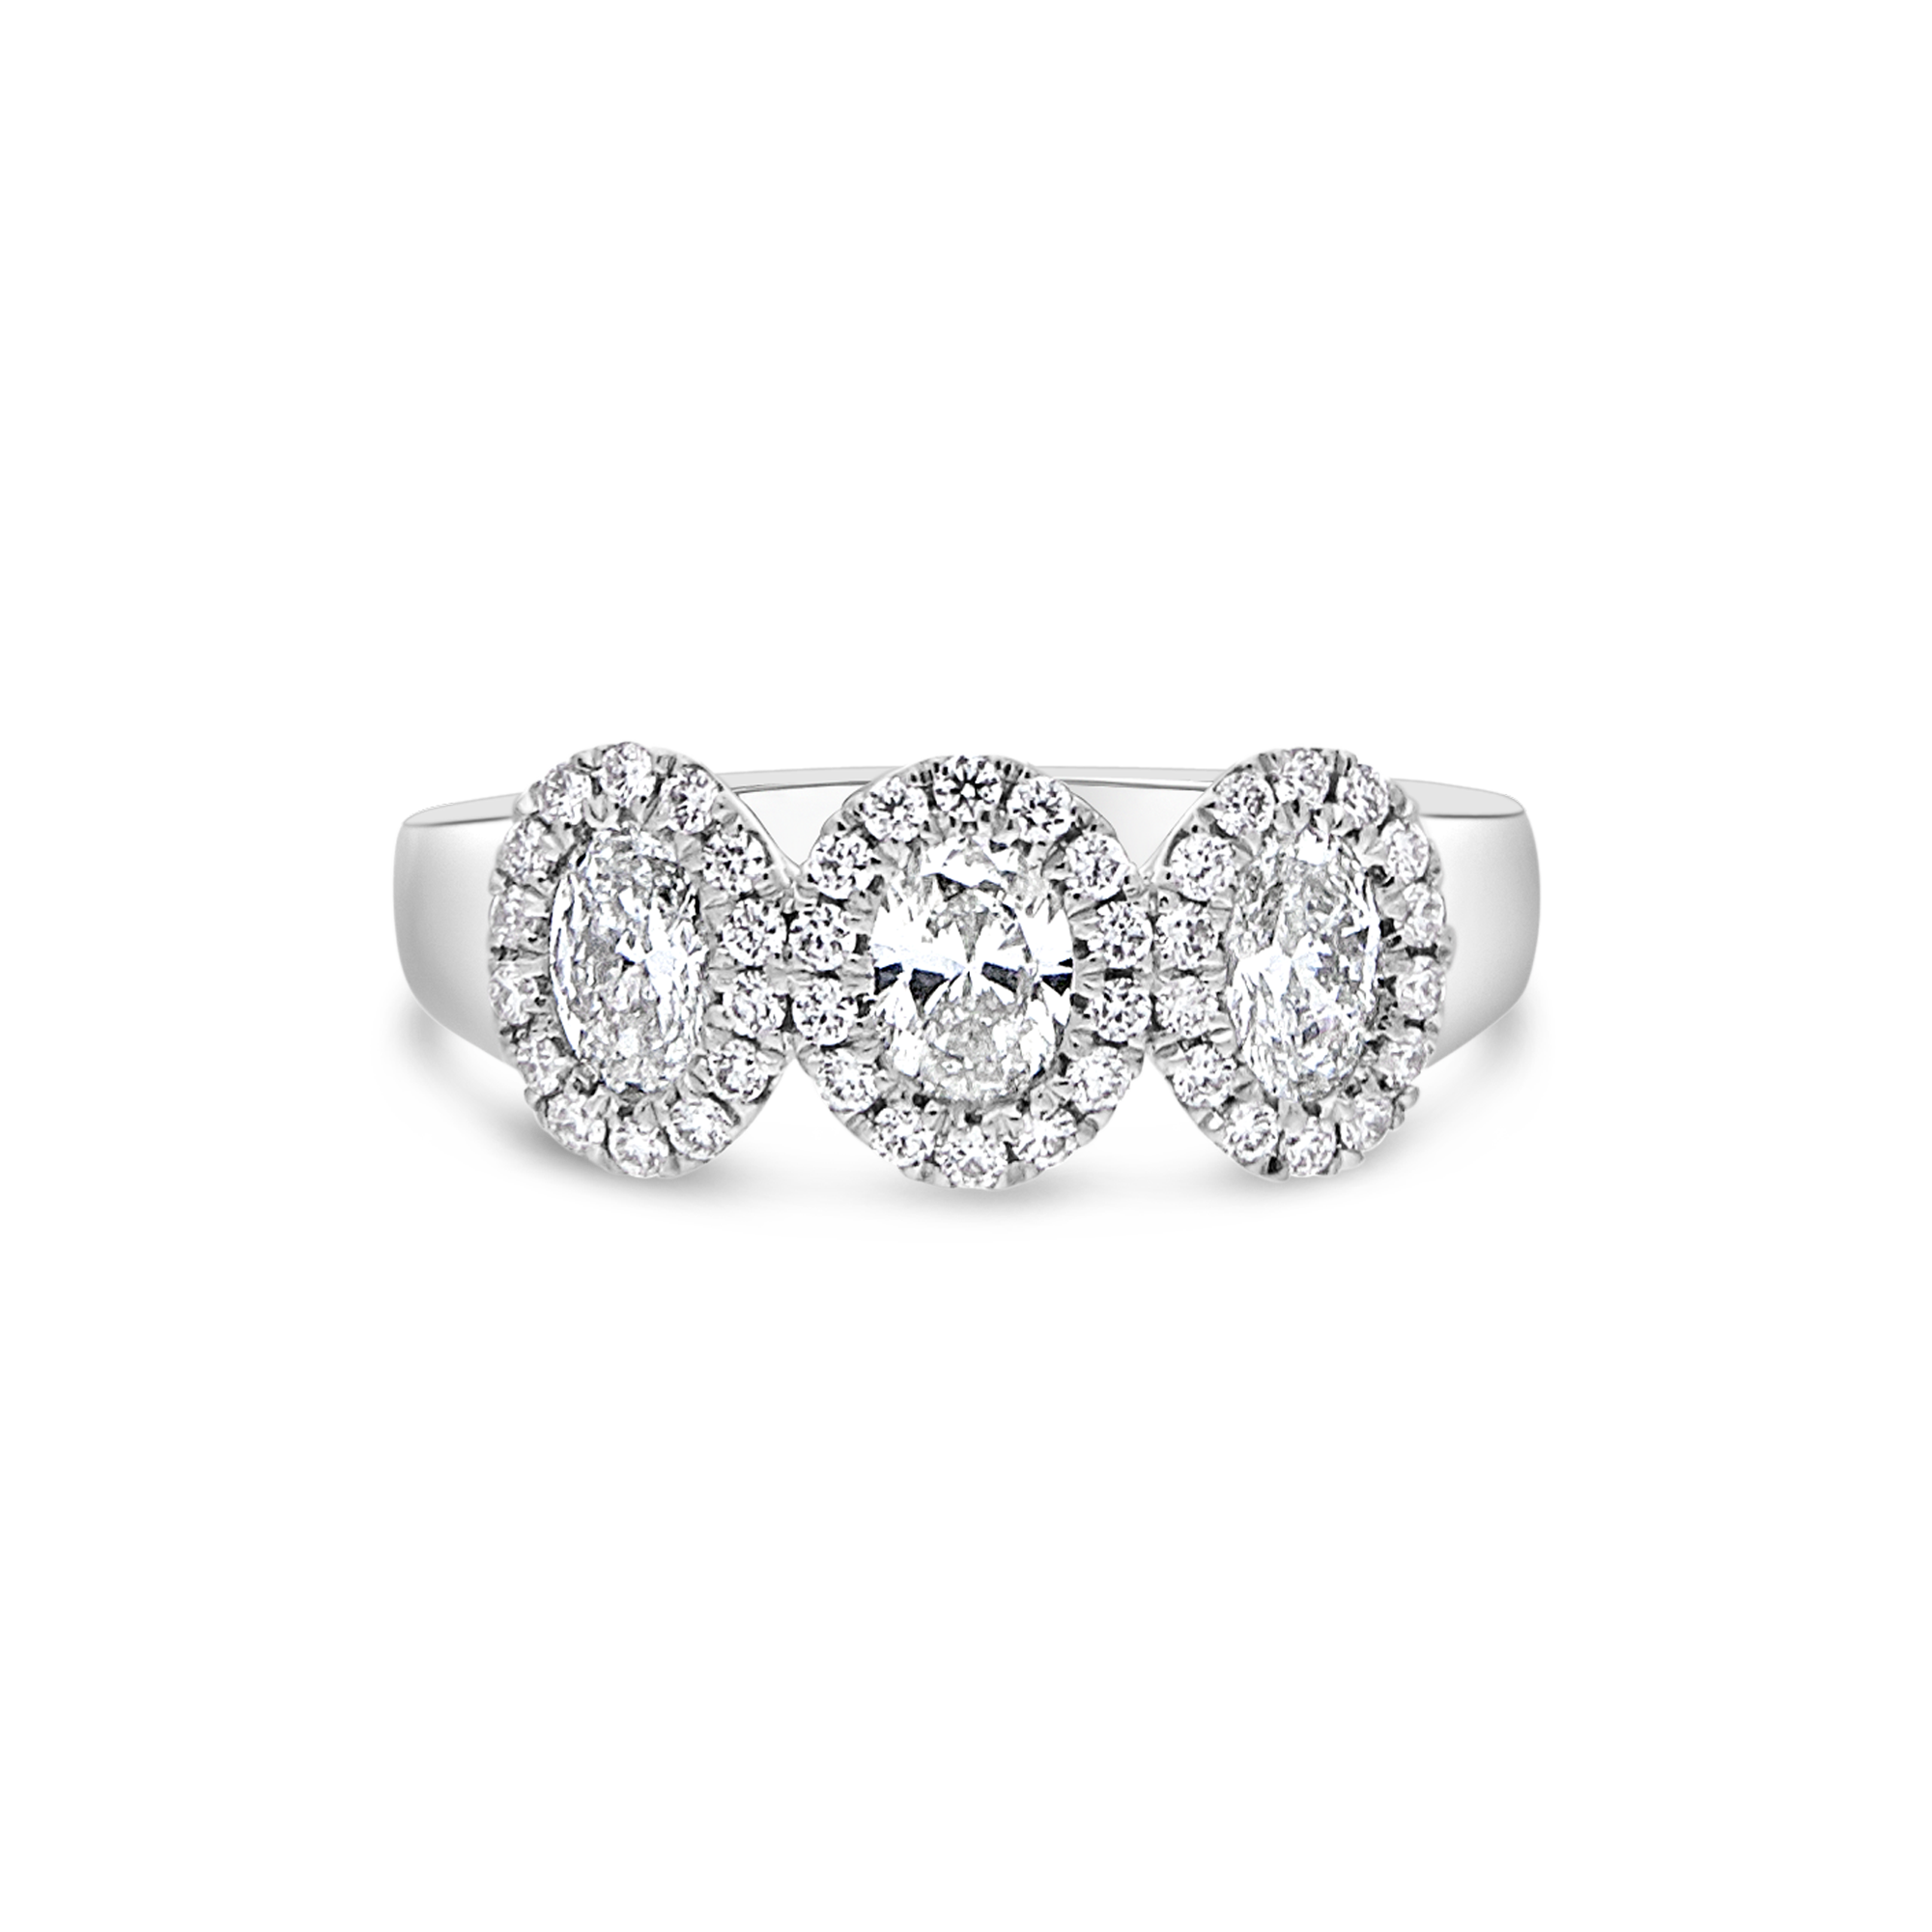 The "Distinguished" Oval Cluster Ring